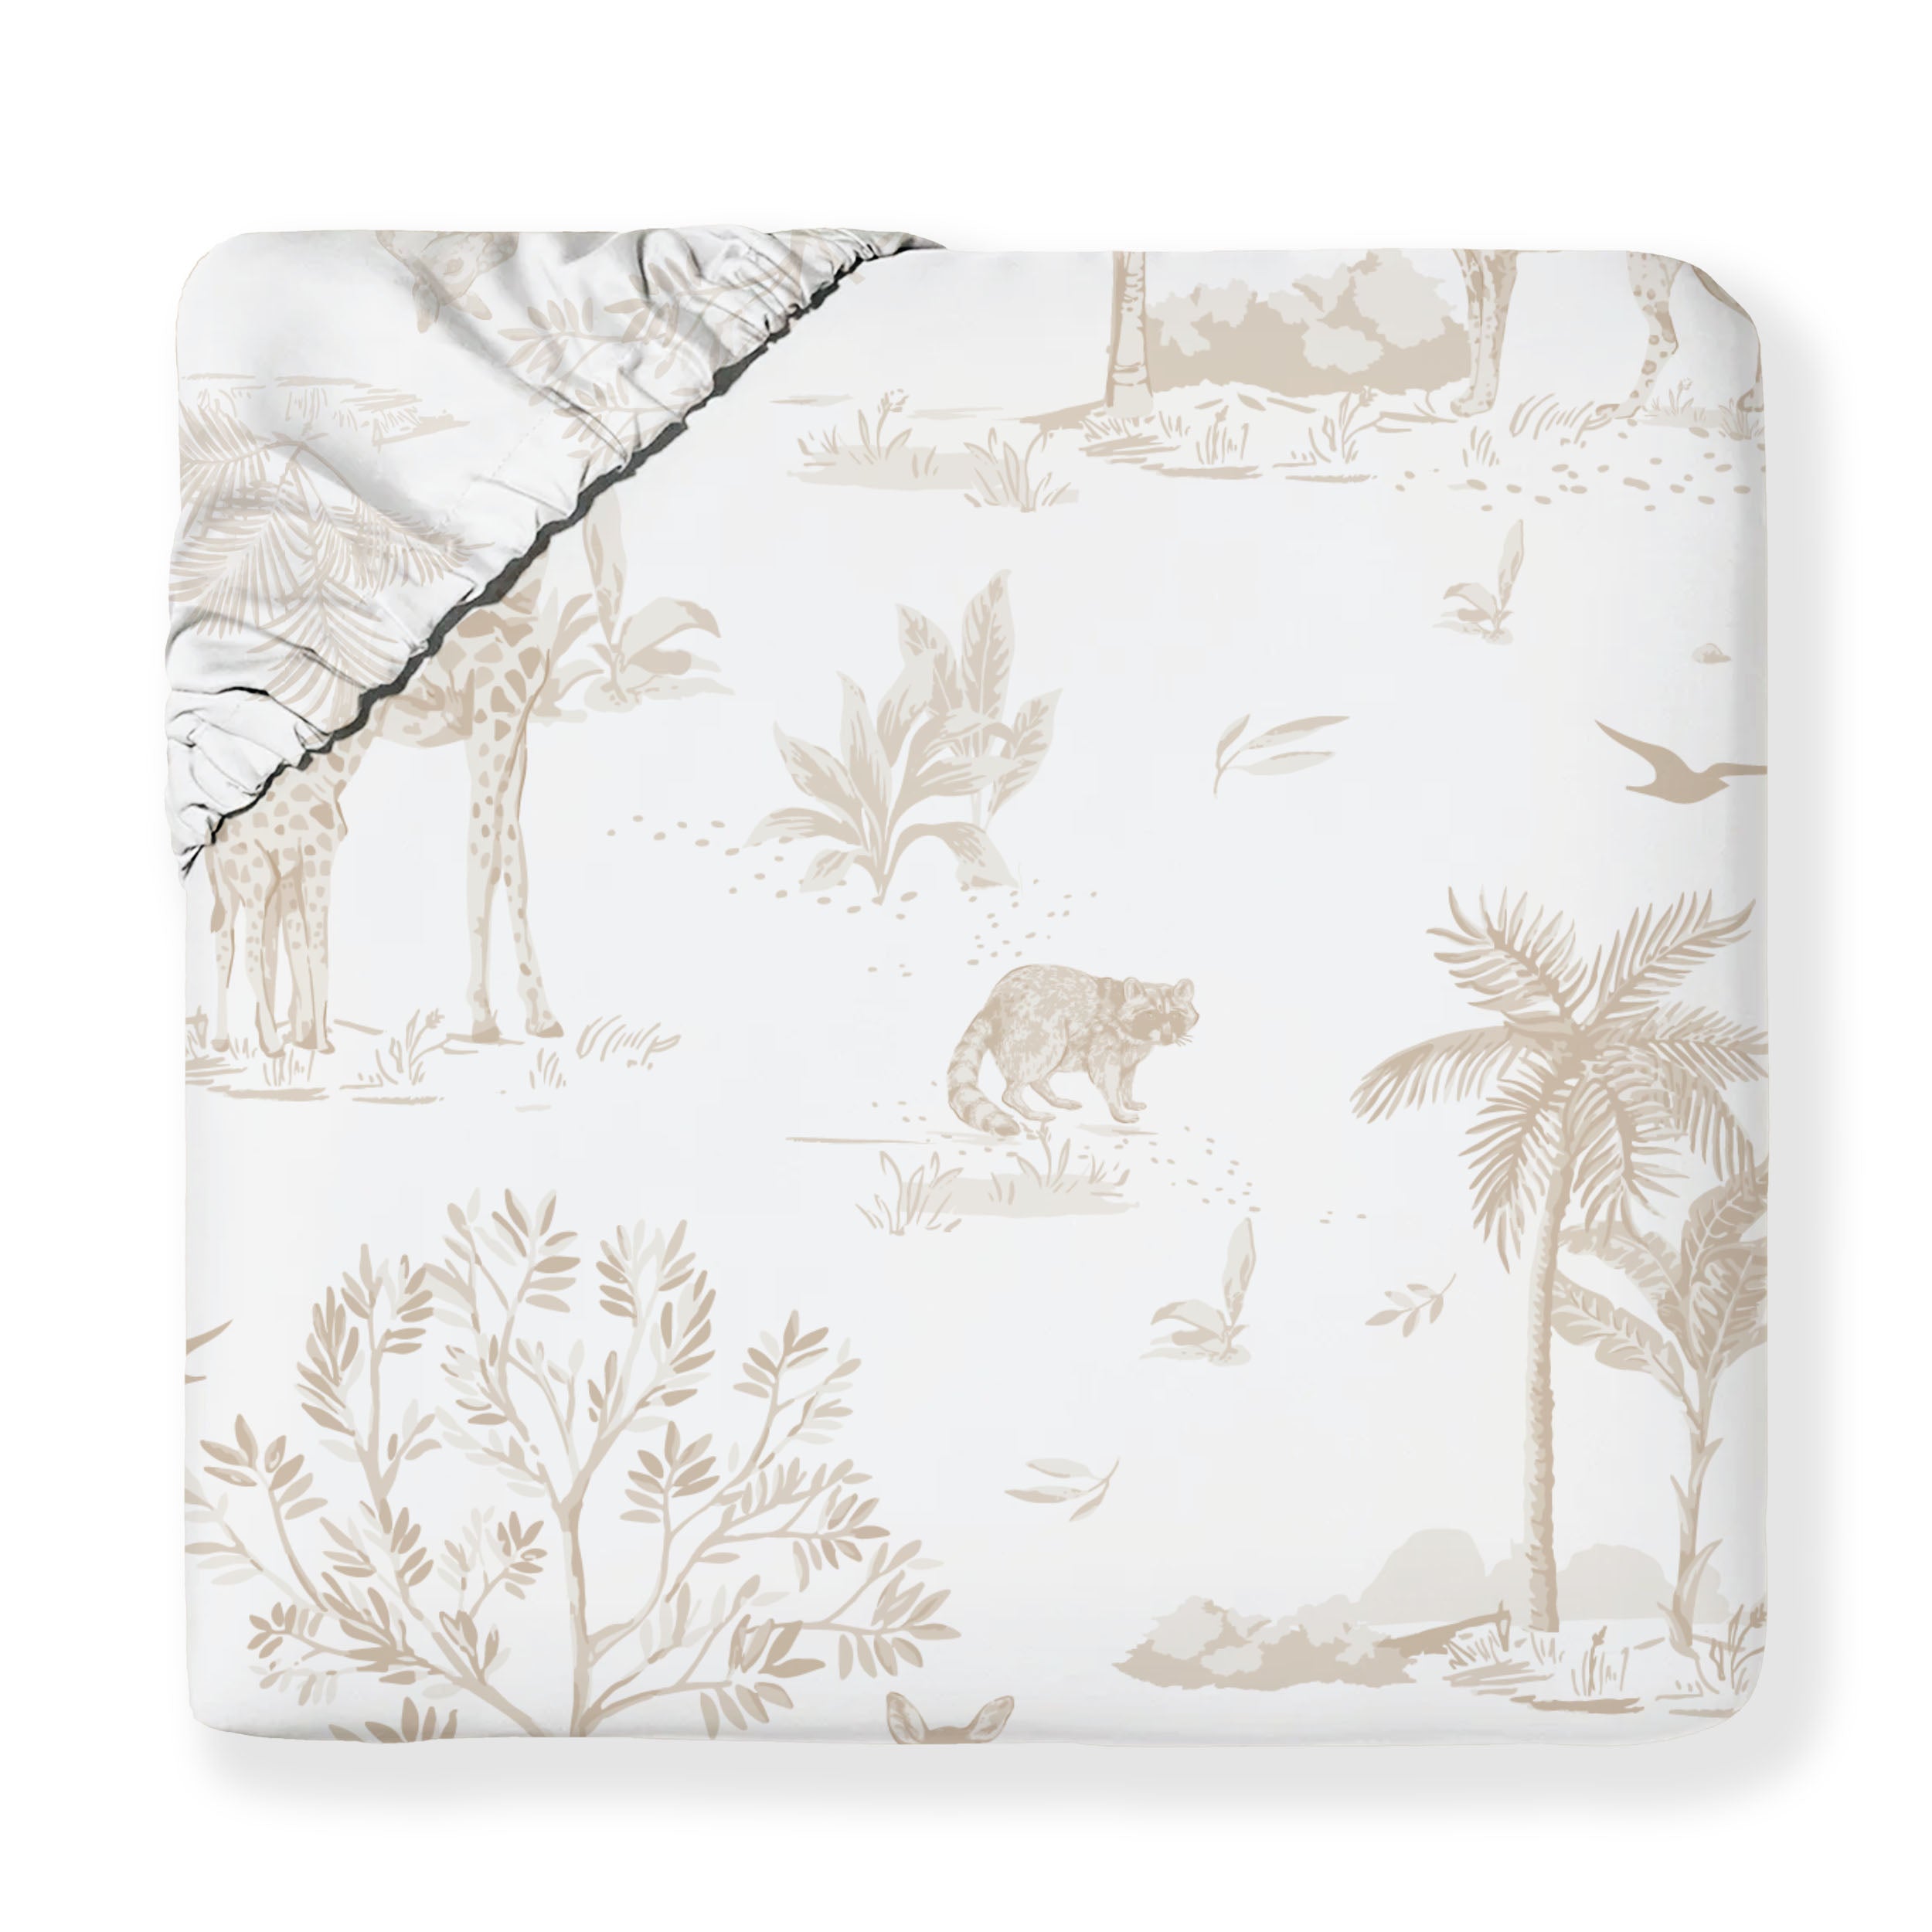 A beige Organic Cotton Fitted Sheet Set - Safari from Makemake Organics, featuring a jungle-themed pattern with depictions of palm trees, various plants, and animals like bears and birds, partially folded to show the white underside.